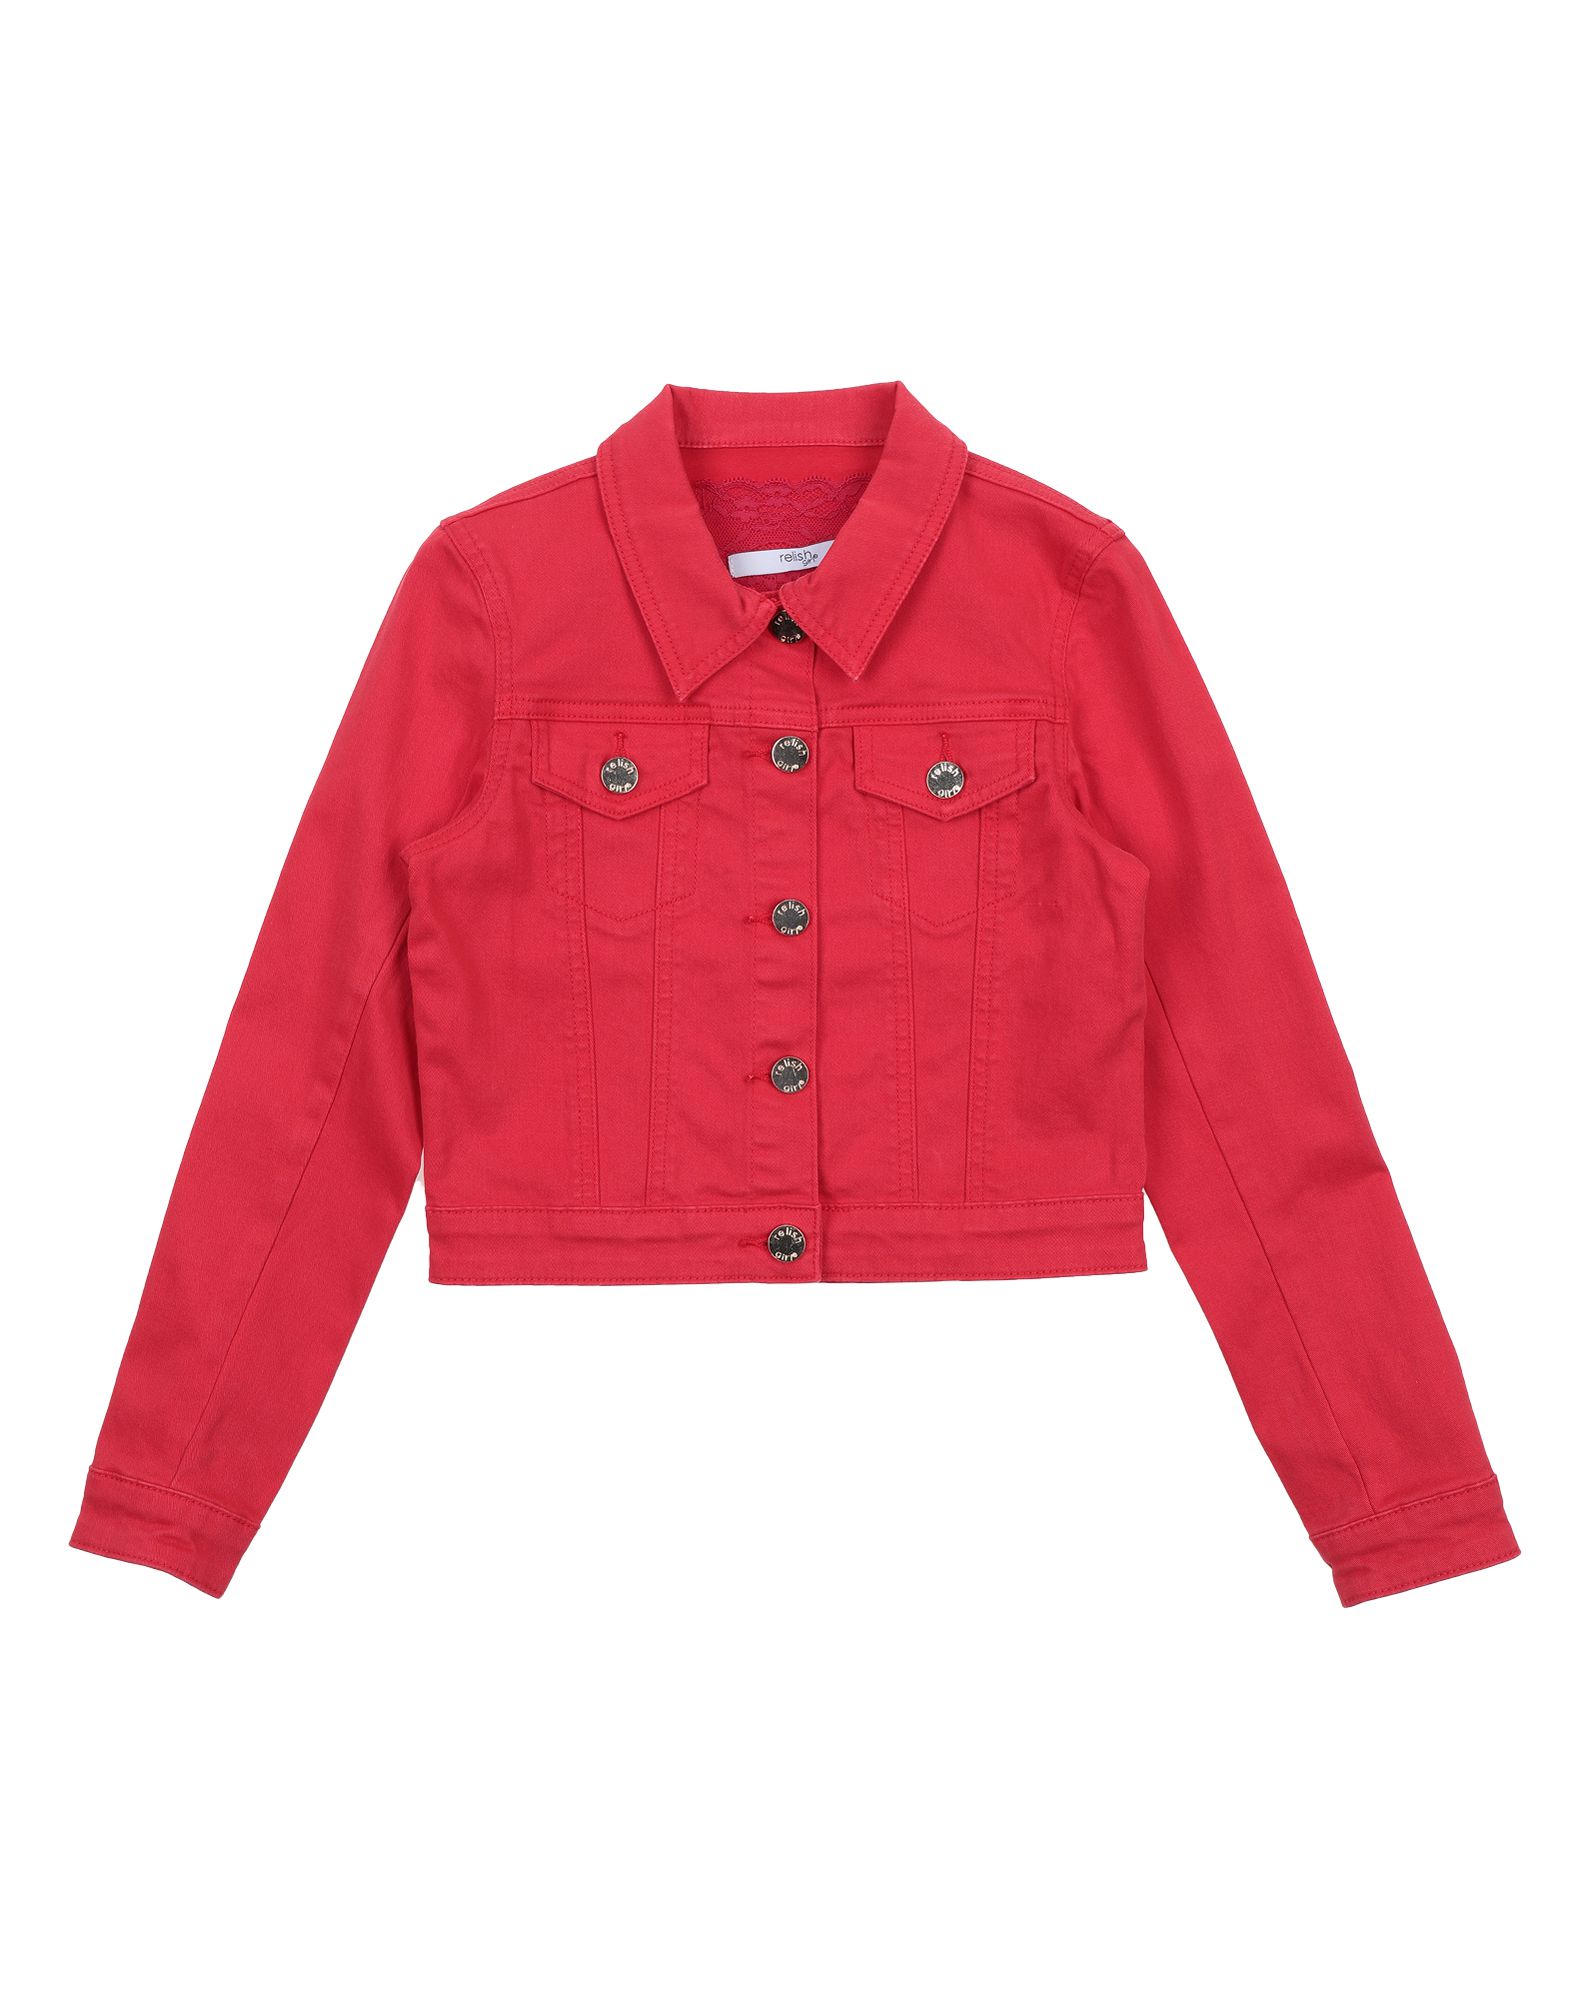 Relish Kids' Jackets In Red